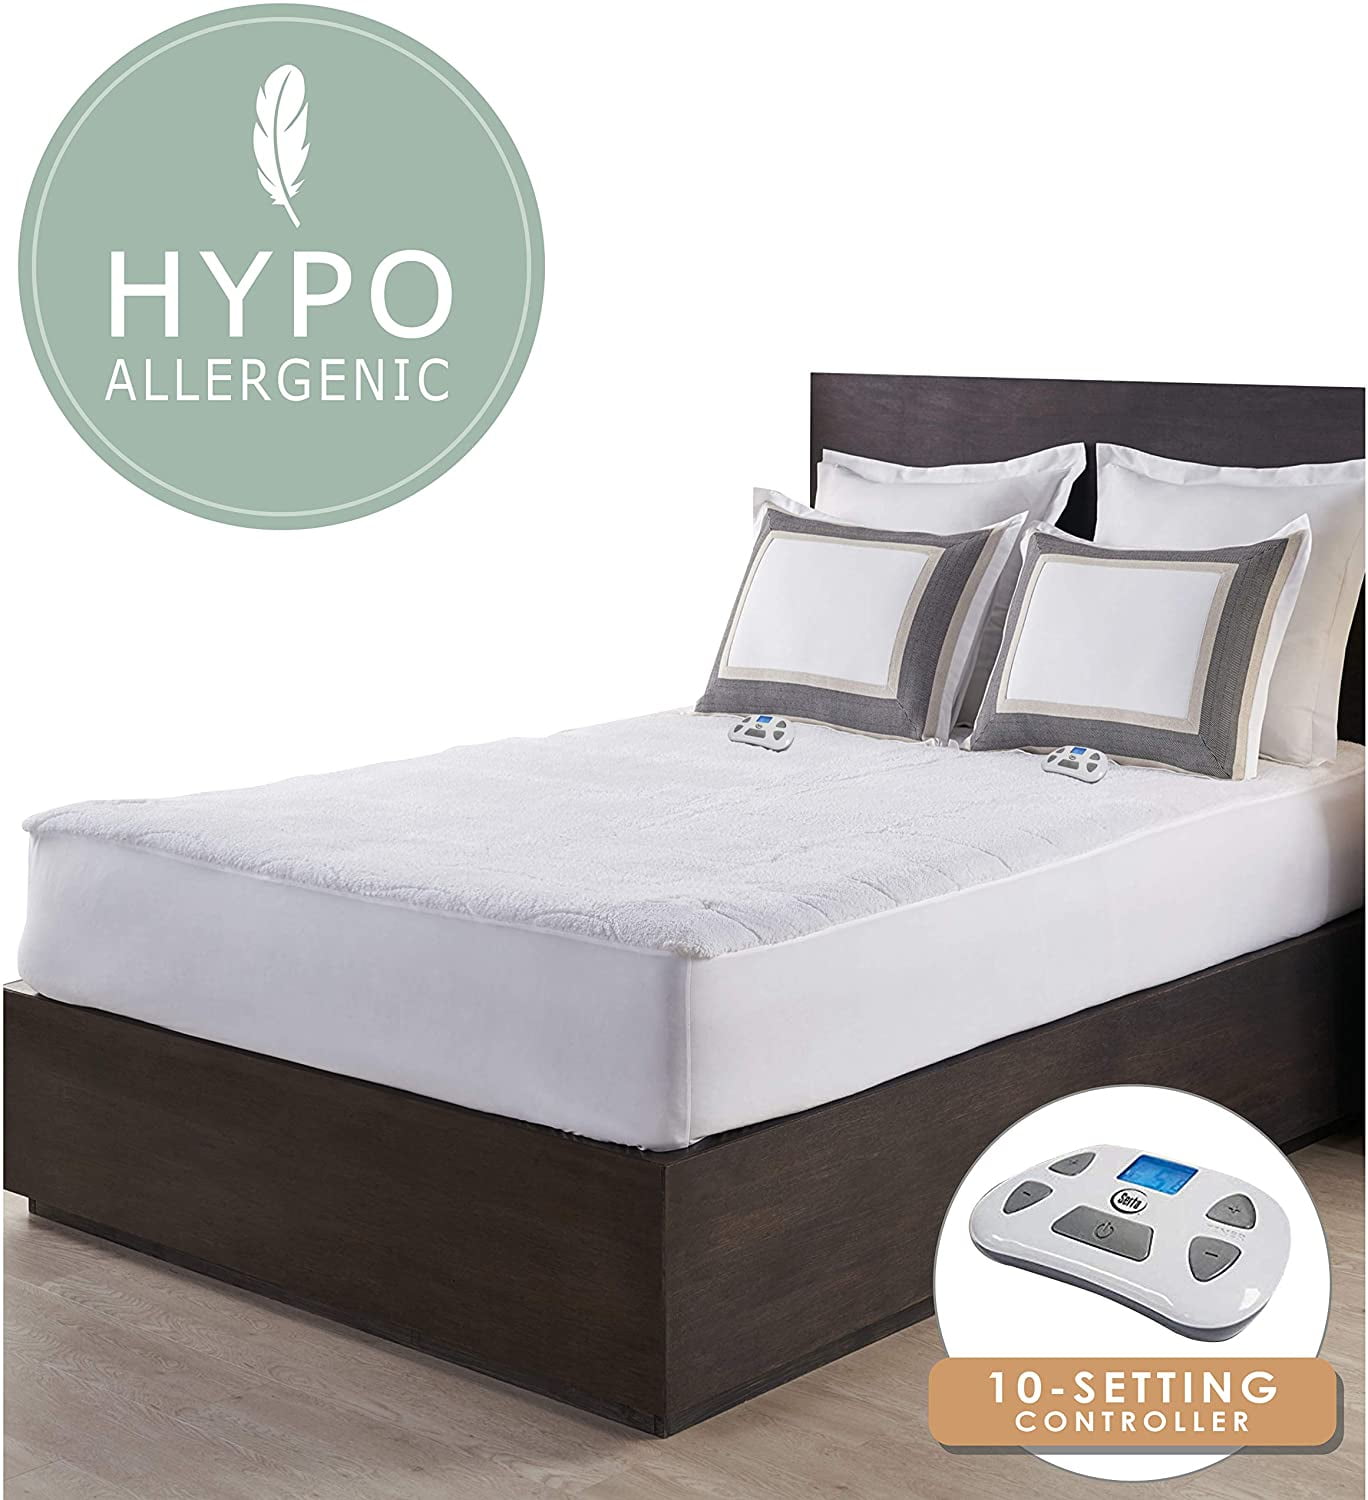 Details about   Deluxe Queen Sherpa Heated Electric Mattress Pad Hypoallergenic 10 Heat Settings 